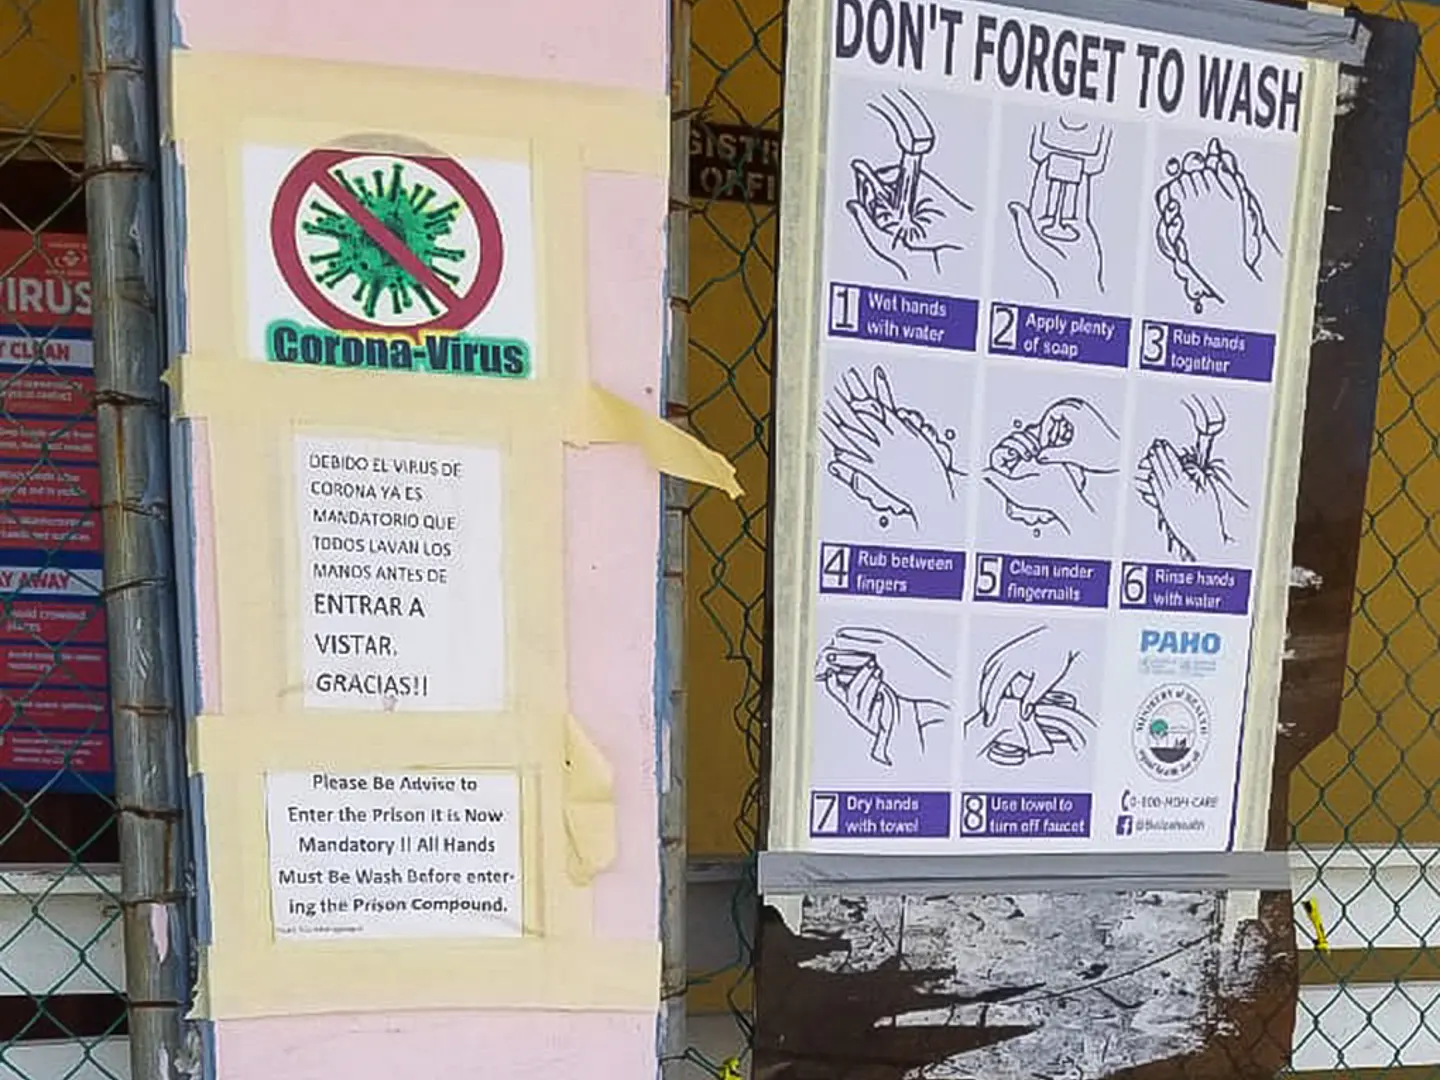 A sign at the Belize Central Prison reminds visitors to wash their hands to help prevent COVID-19.